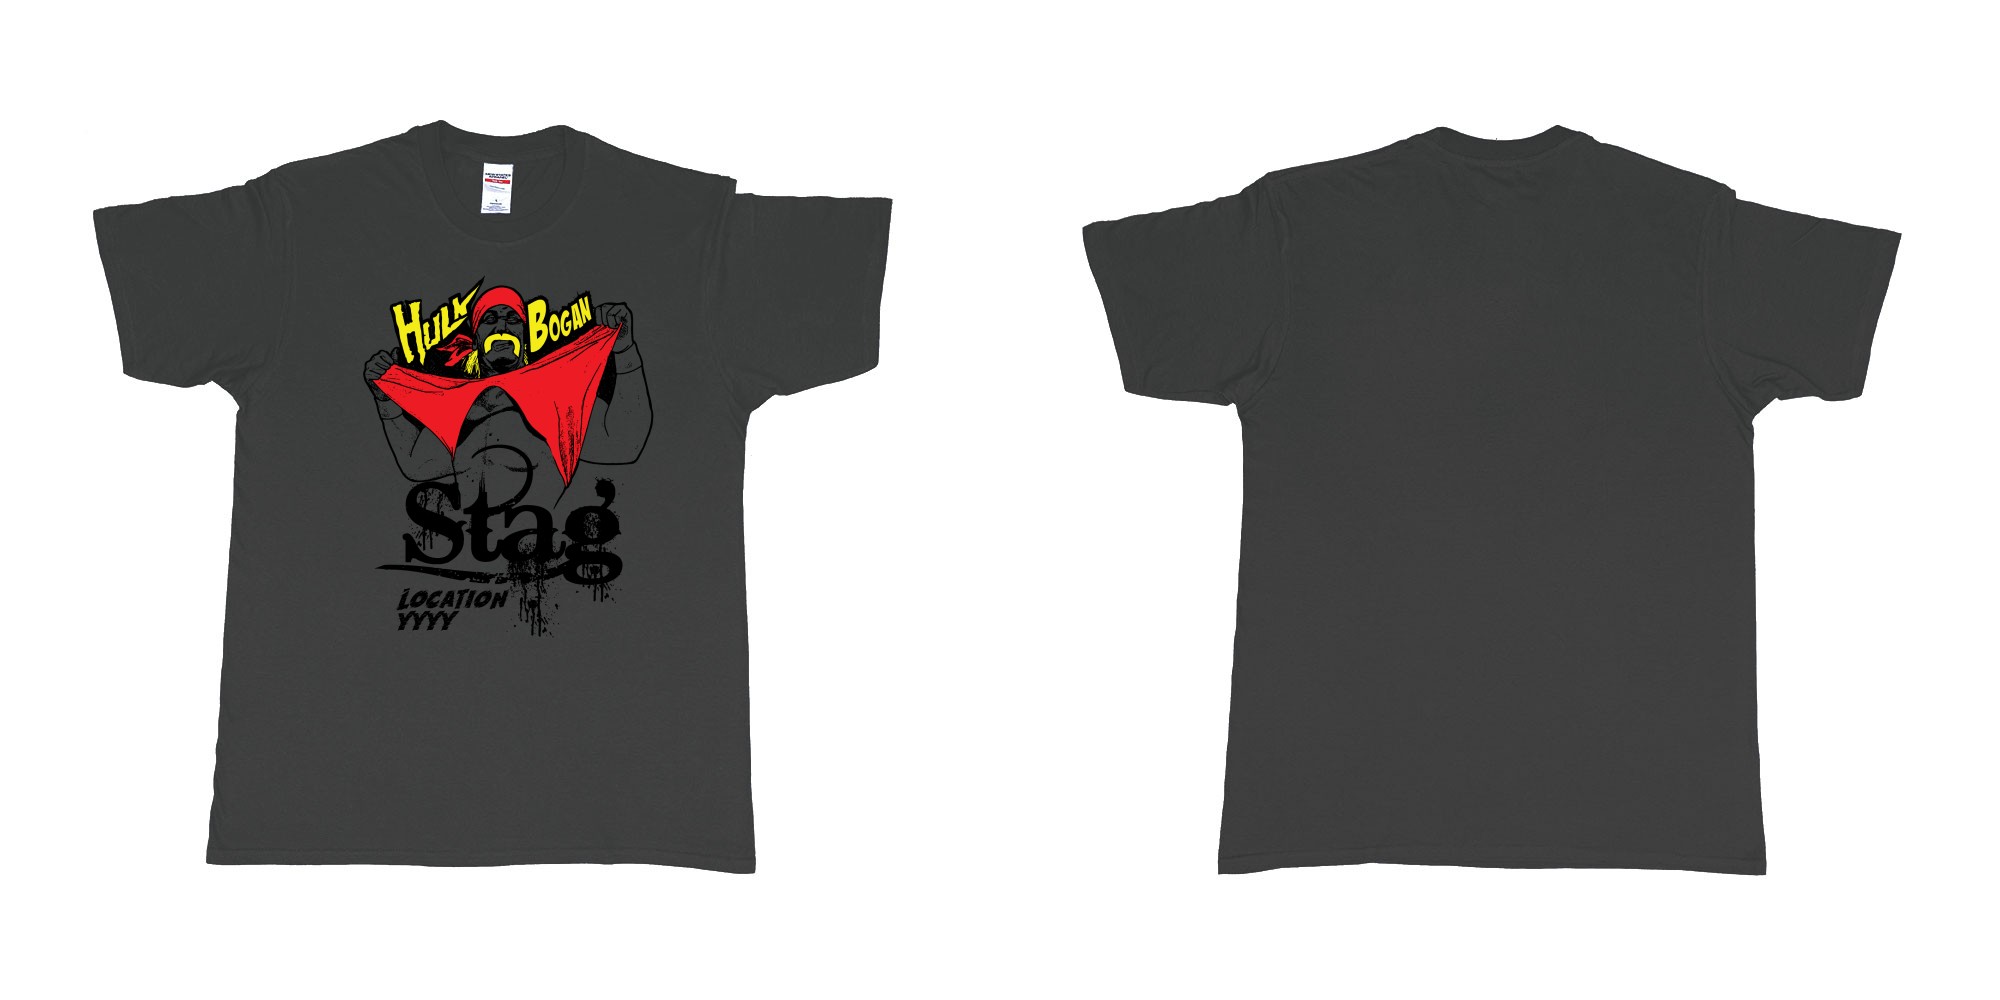 Custom tshirt design hulk hogan bogan in fabric color black choice your own text made in Bali by The Pirate Way